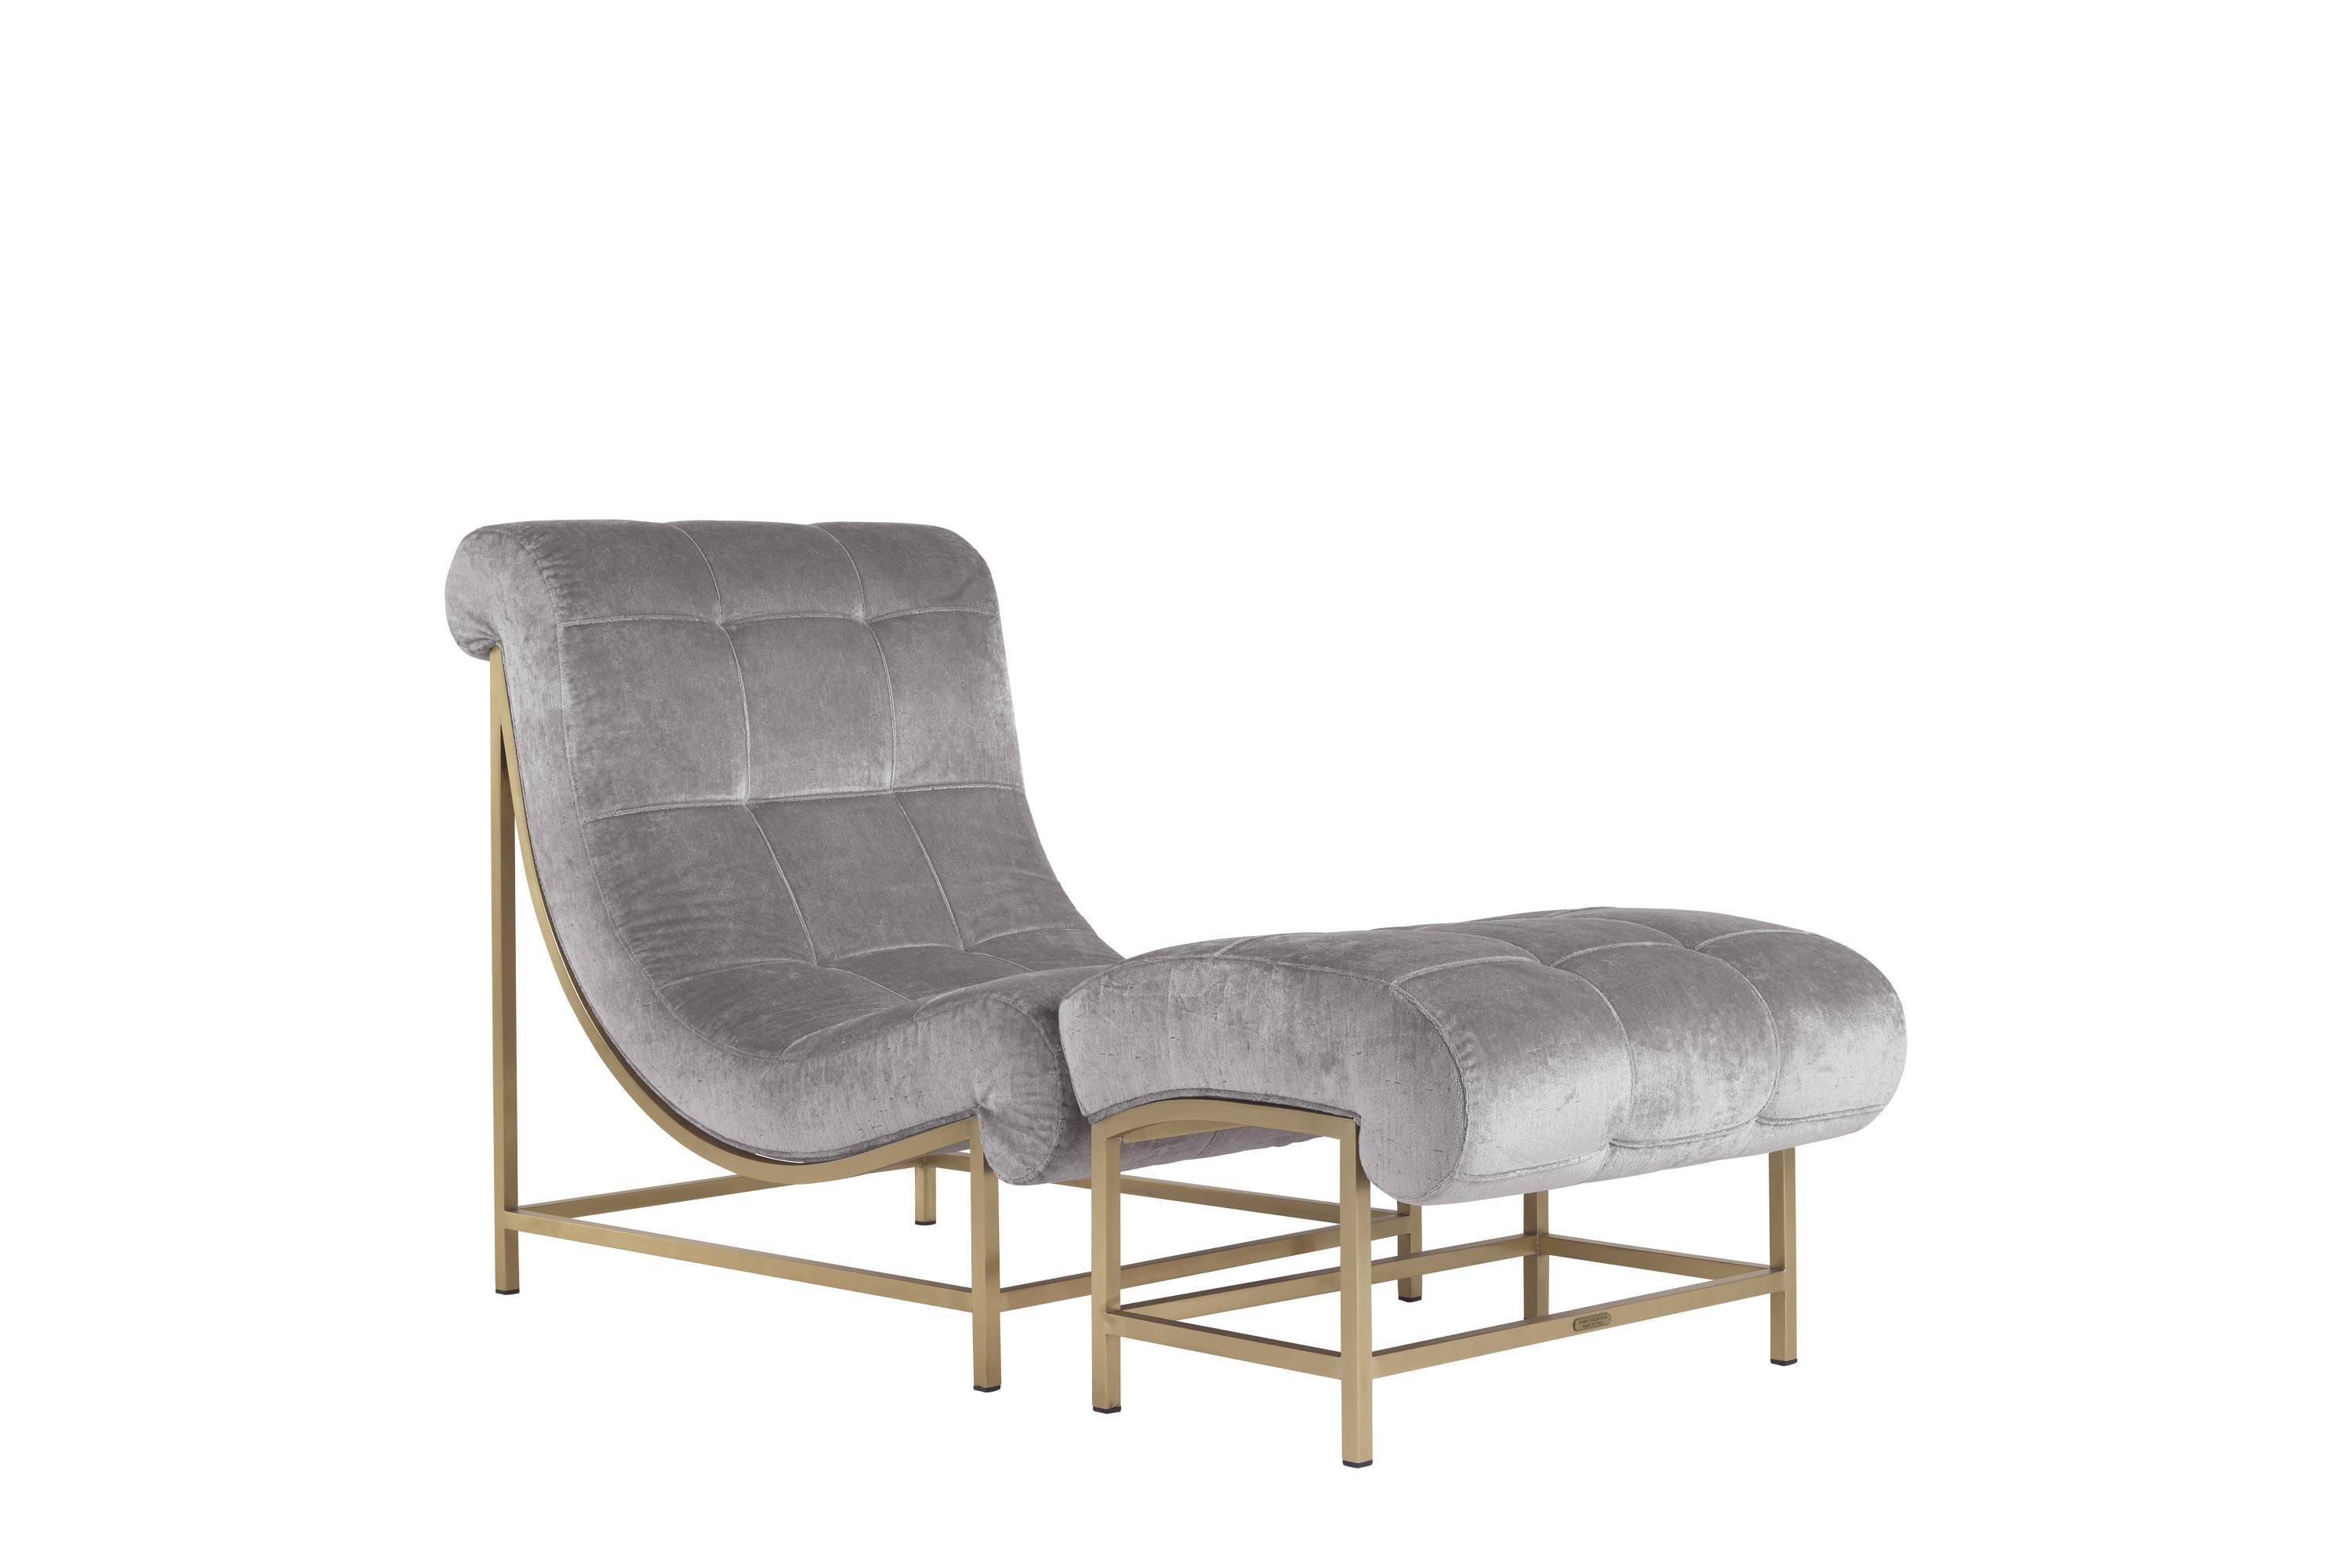 MARQUISE chaise longue - Discover the elegance of luxury Oro Bianco collection by Jumbo collection